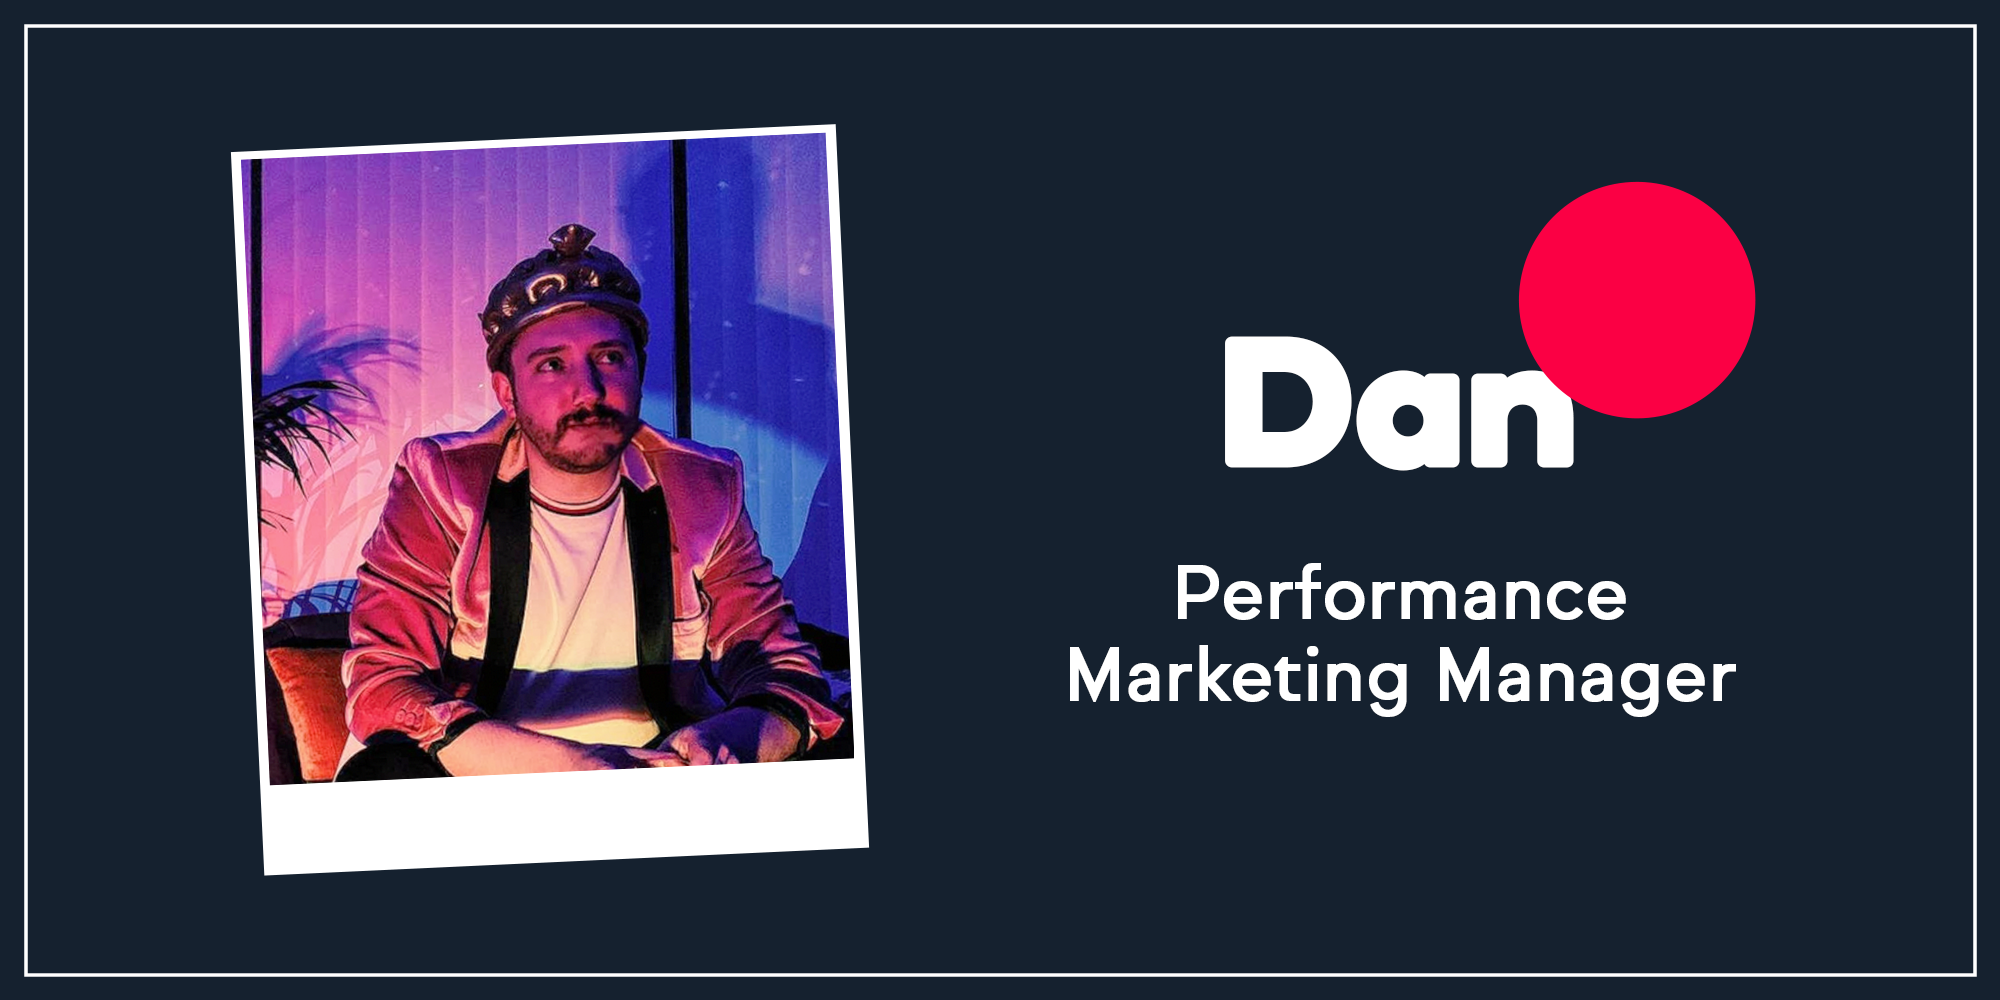 Get to know our team with our new Q&A feature. Today we meet Dan, our Performance Marketing Manager.